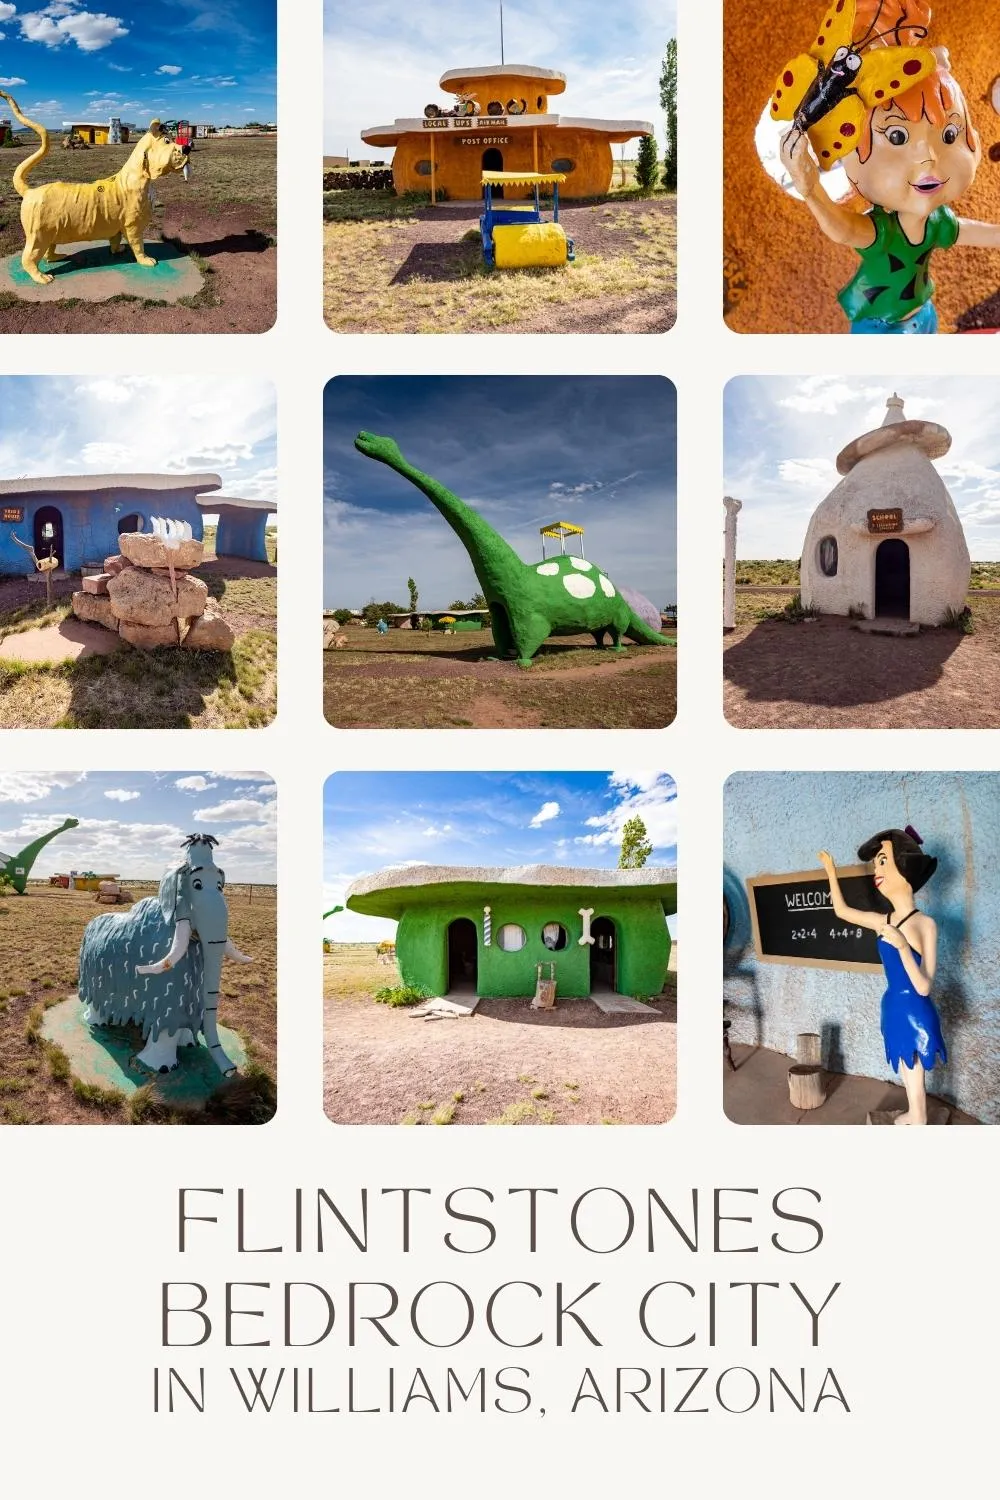 Flintstones, meet the Flintstones — at Flintstones Bedrock City in Williams, Arizona. Have a yabba-dabba-doo time at this fun roadside attraction! Located between Route 66 and the Grand Canyon Flintstones Bedrock City is a nostalgic roadside attraction and the perfect Arizona road trip stop to add to your travel itinerary. Celebrate the famous cartoon at this theme park. #RoadTrip #ArizonaroadTrip #Route66 #RoadsideAmerica #RoadsideAttraction #RoadsideAttractions #RoadTripStops #Arizona